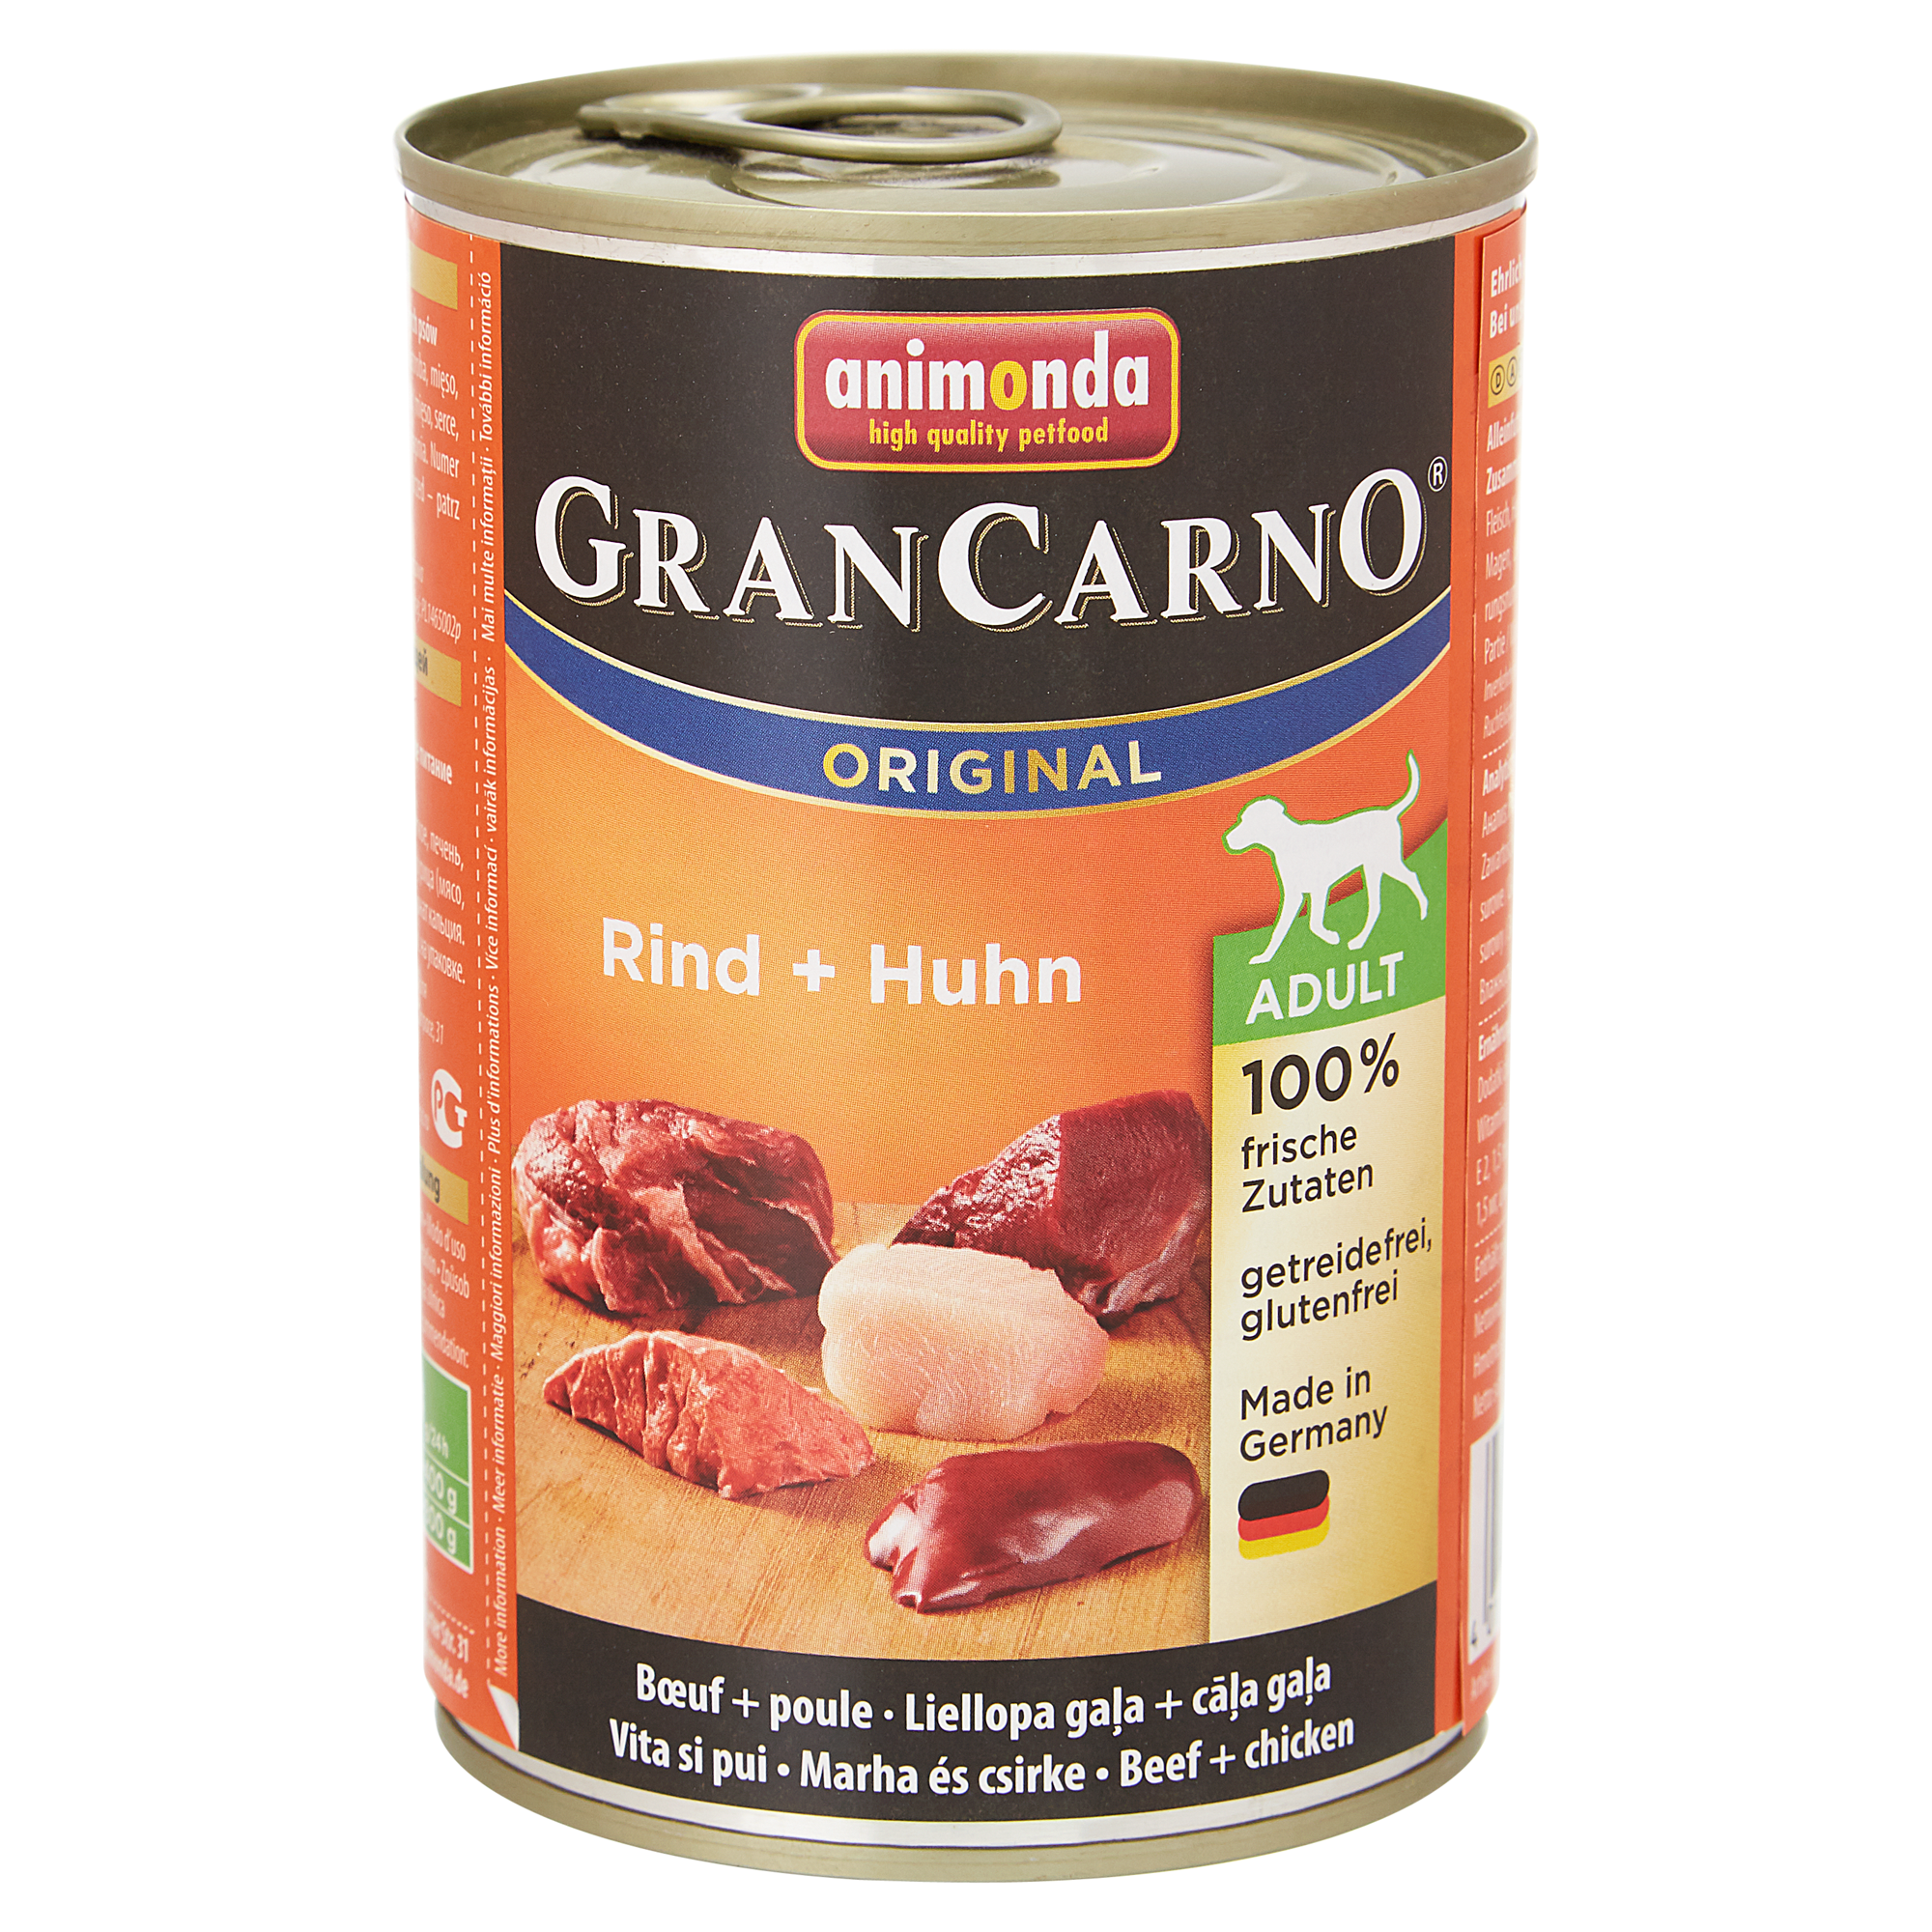 Hundenassfutter "Gran Carno" Original mit Rind/Huhn 400 g + product picture